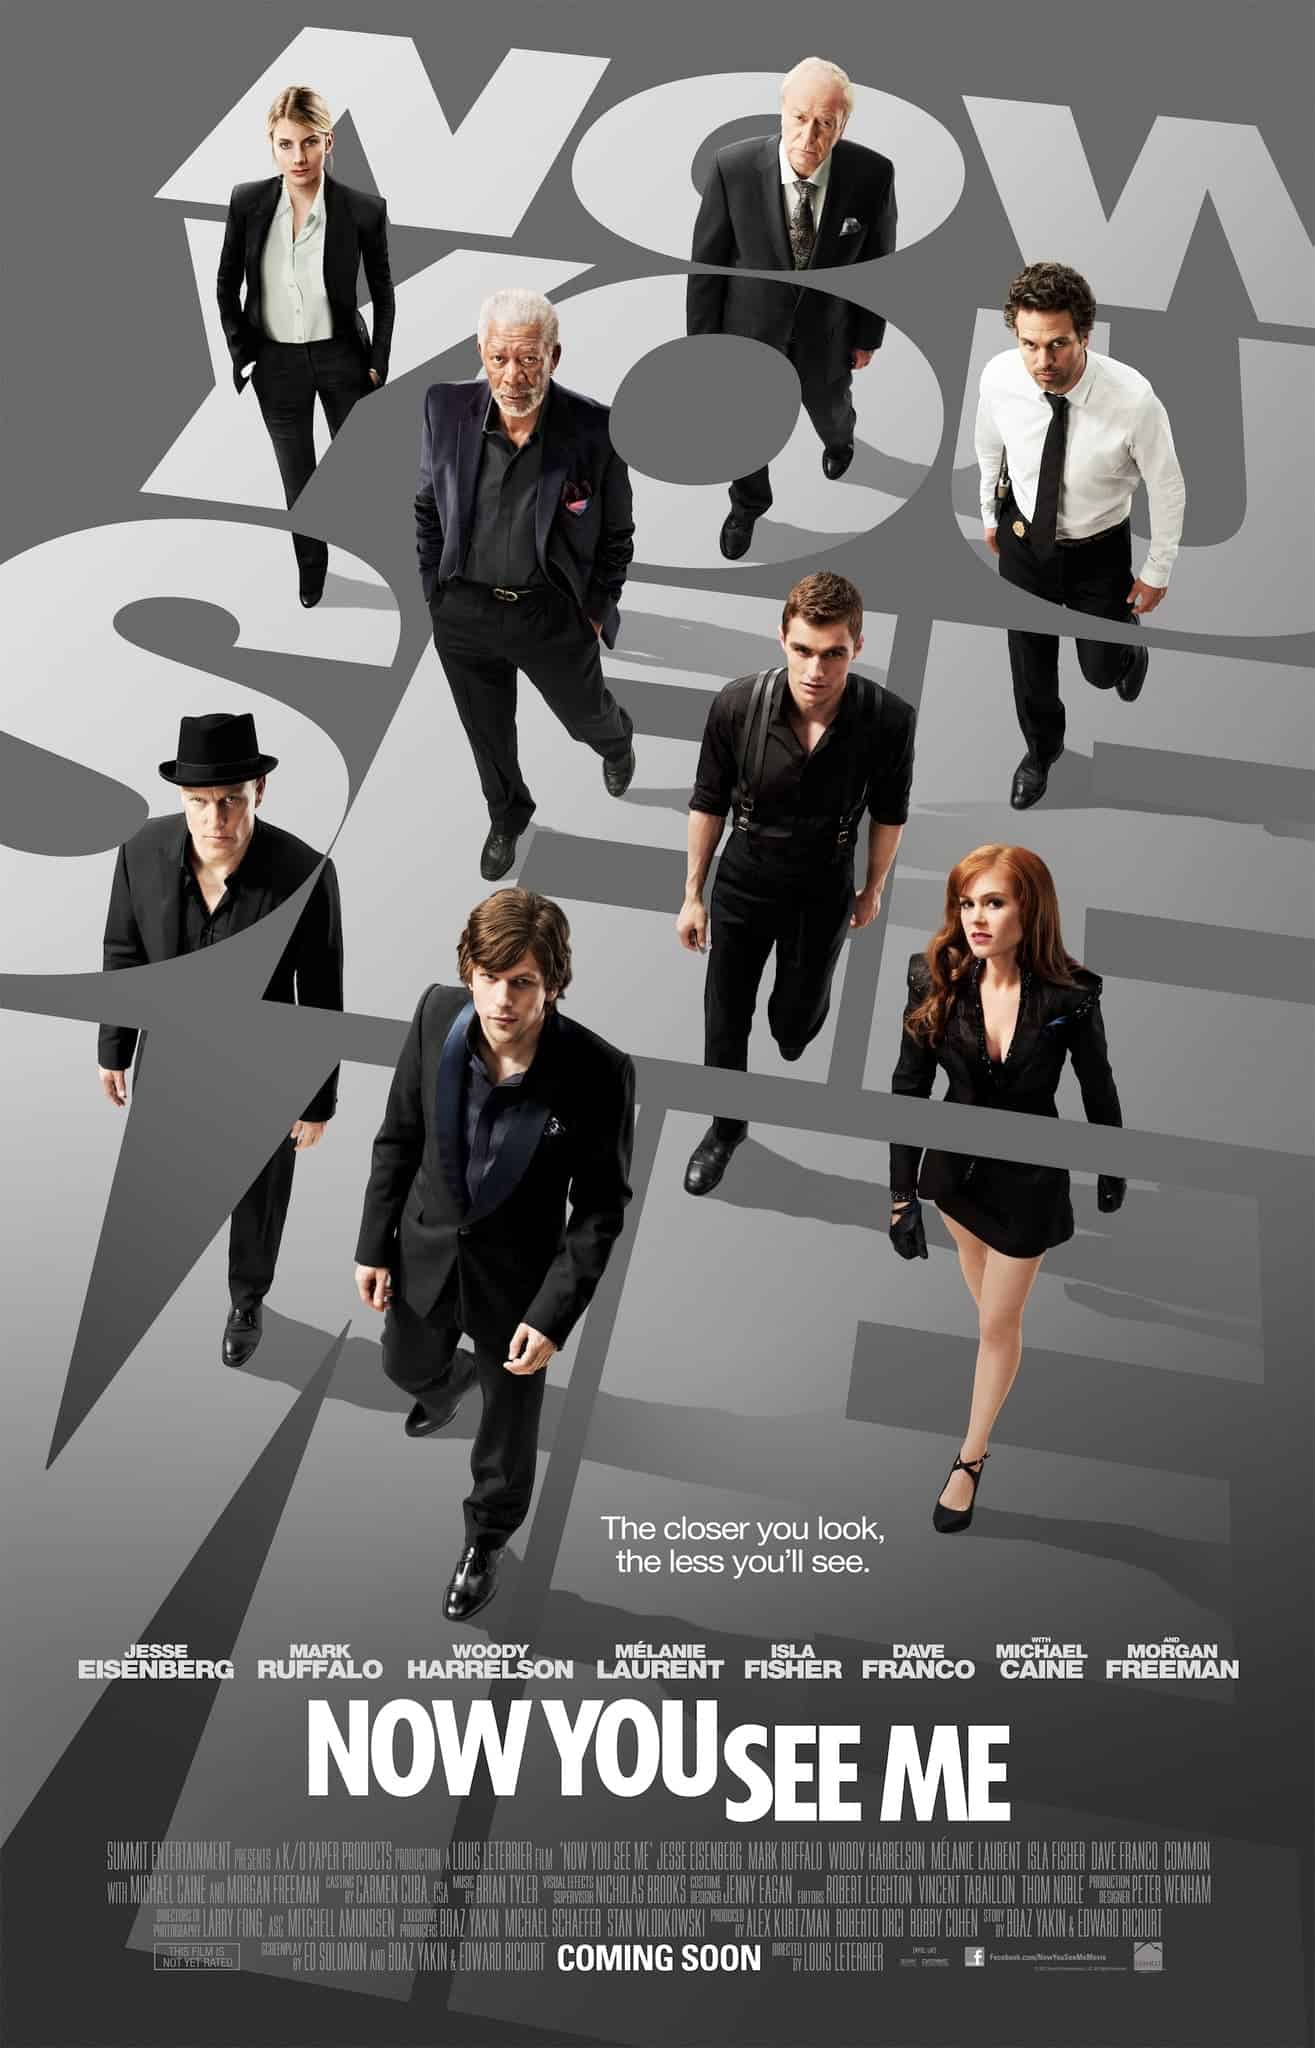 Now You See Me (2013) 15 Best Con Movies to Add in Your Watchlist